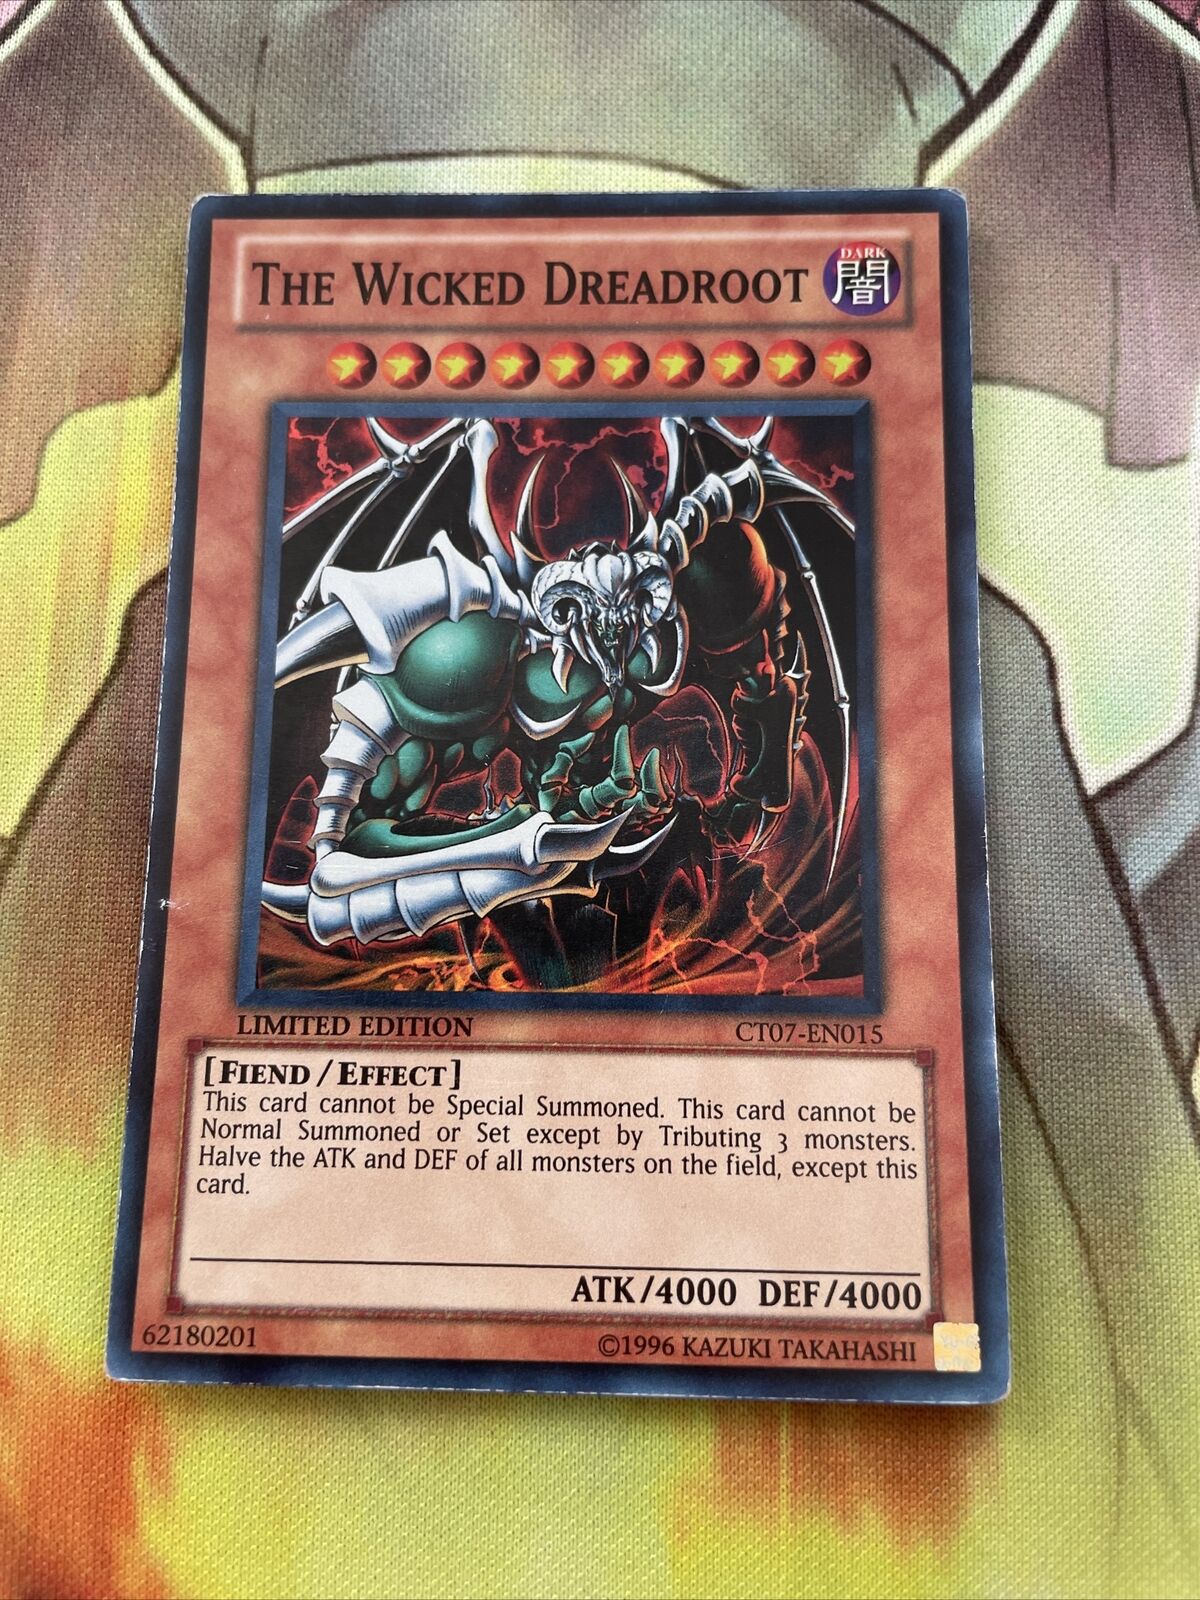 CT07-EN015  The Wicked Dreadroot Super Rare Limited Edition Yugioh Card